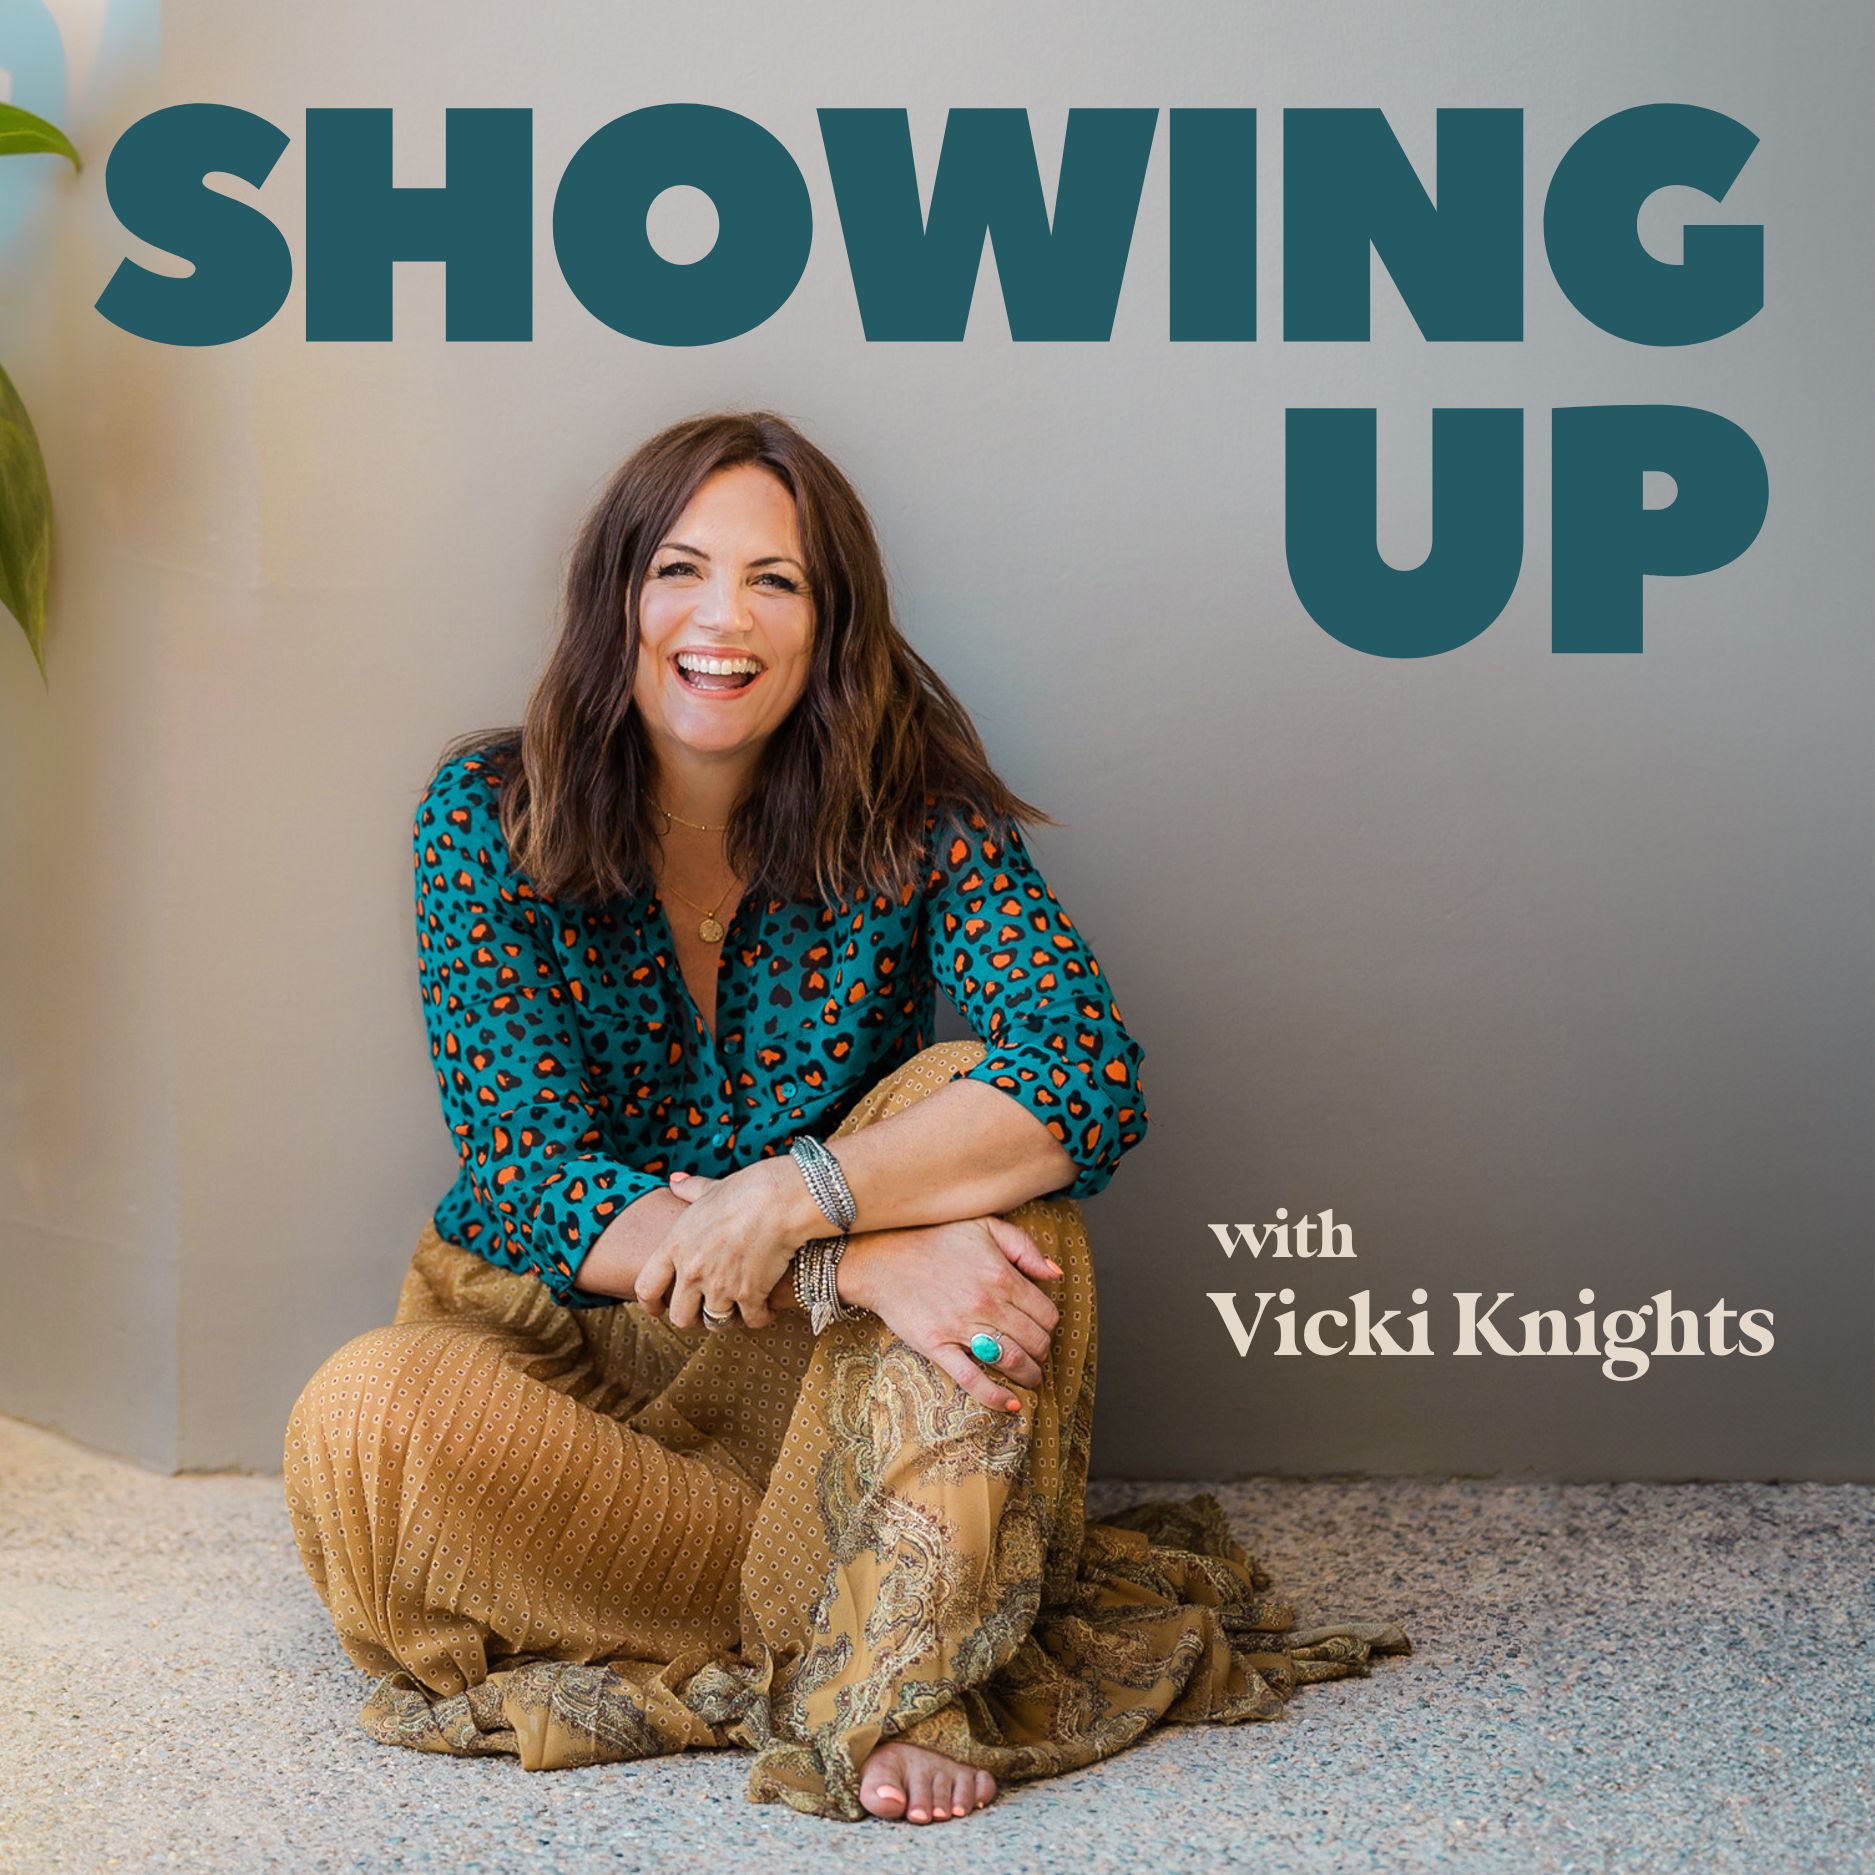 showing up with vicki knights the podcast